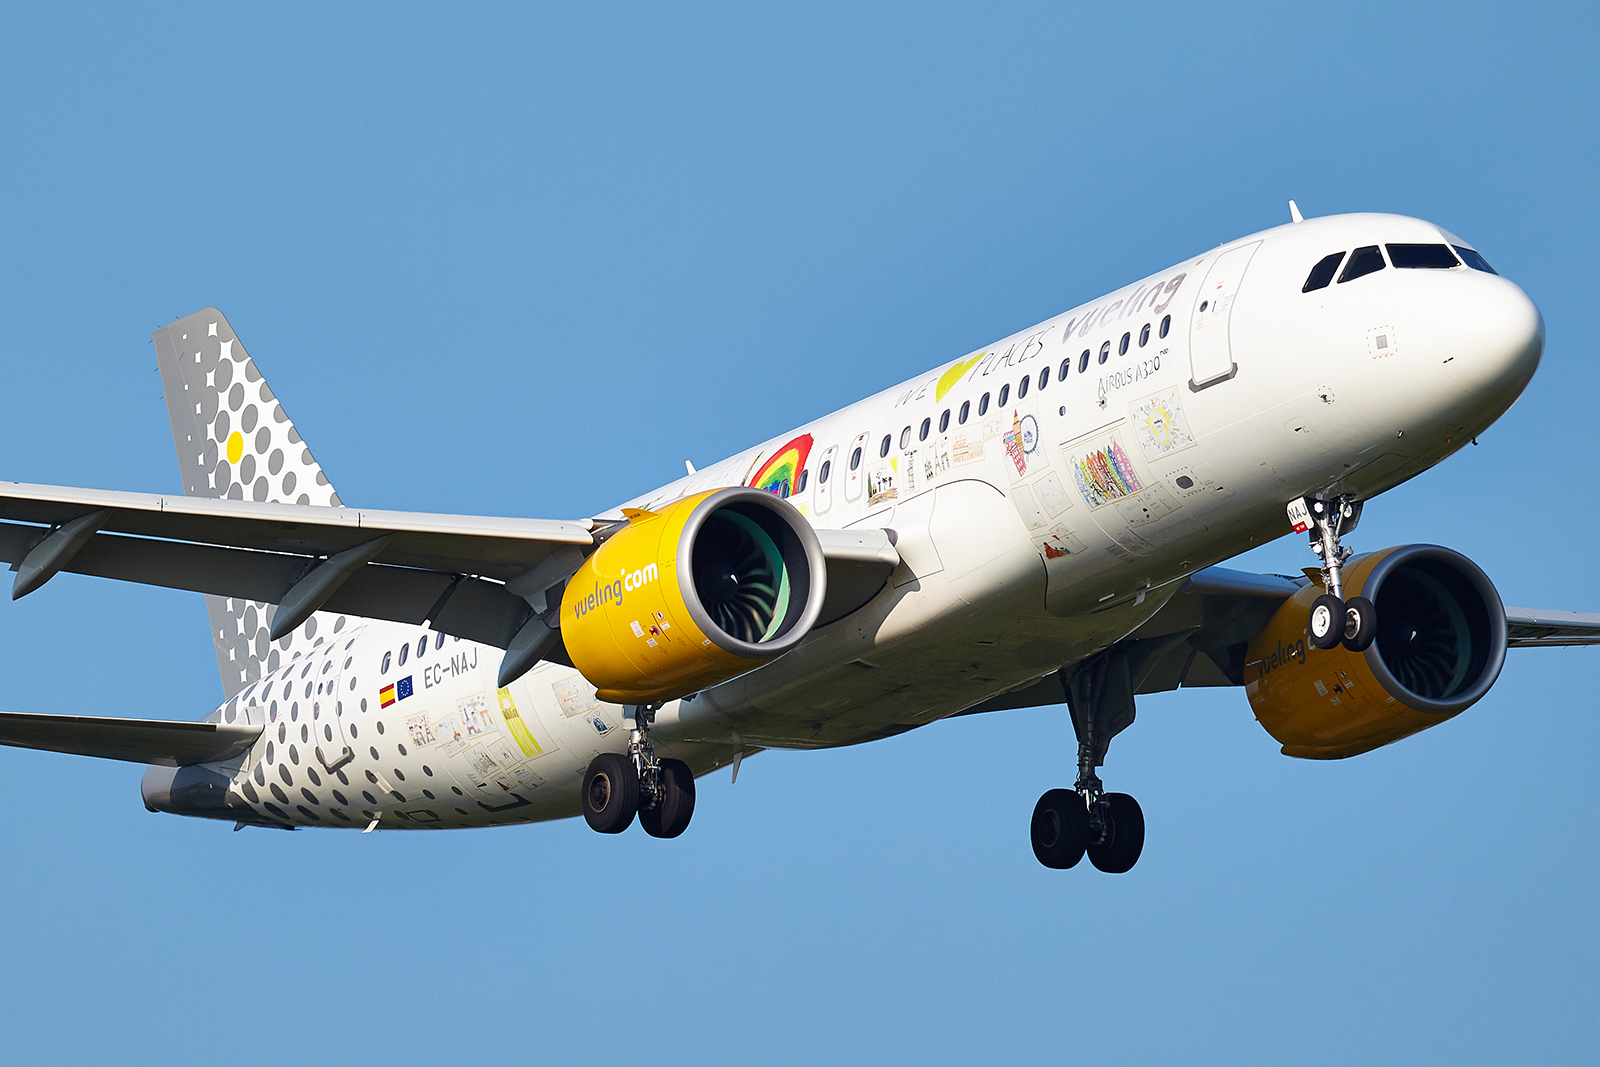 [25/04/2019] A320neo (EC-NAJ) Vueling "We love places" livery 1905240958185493216250010